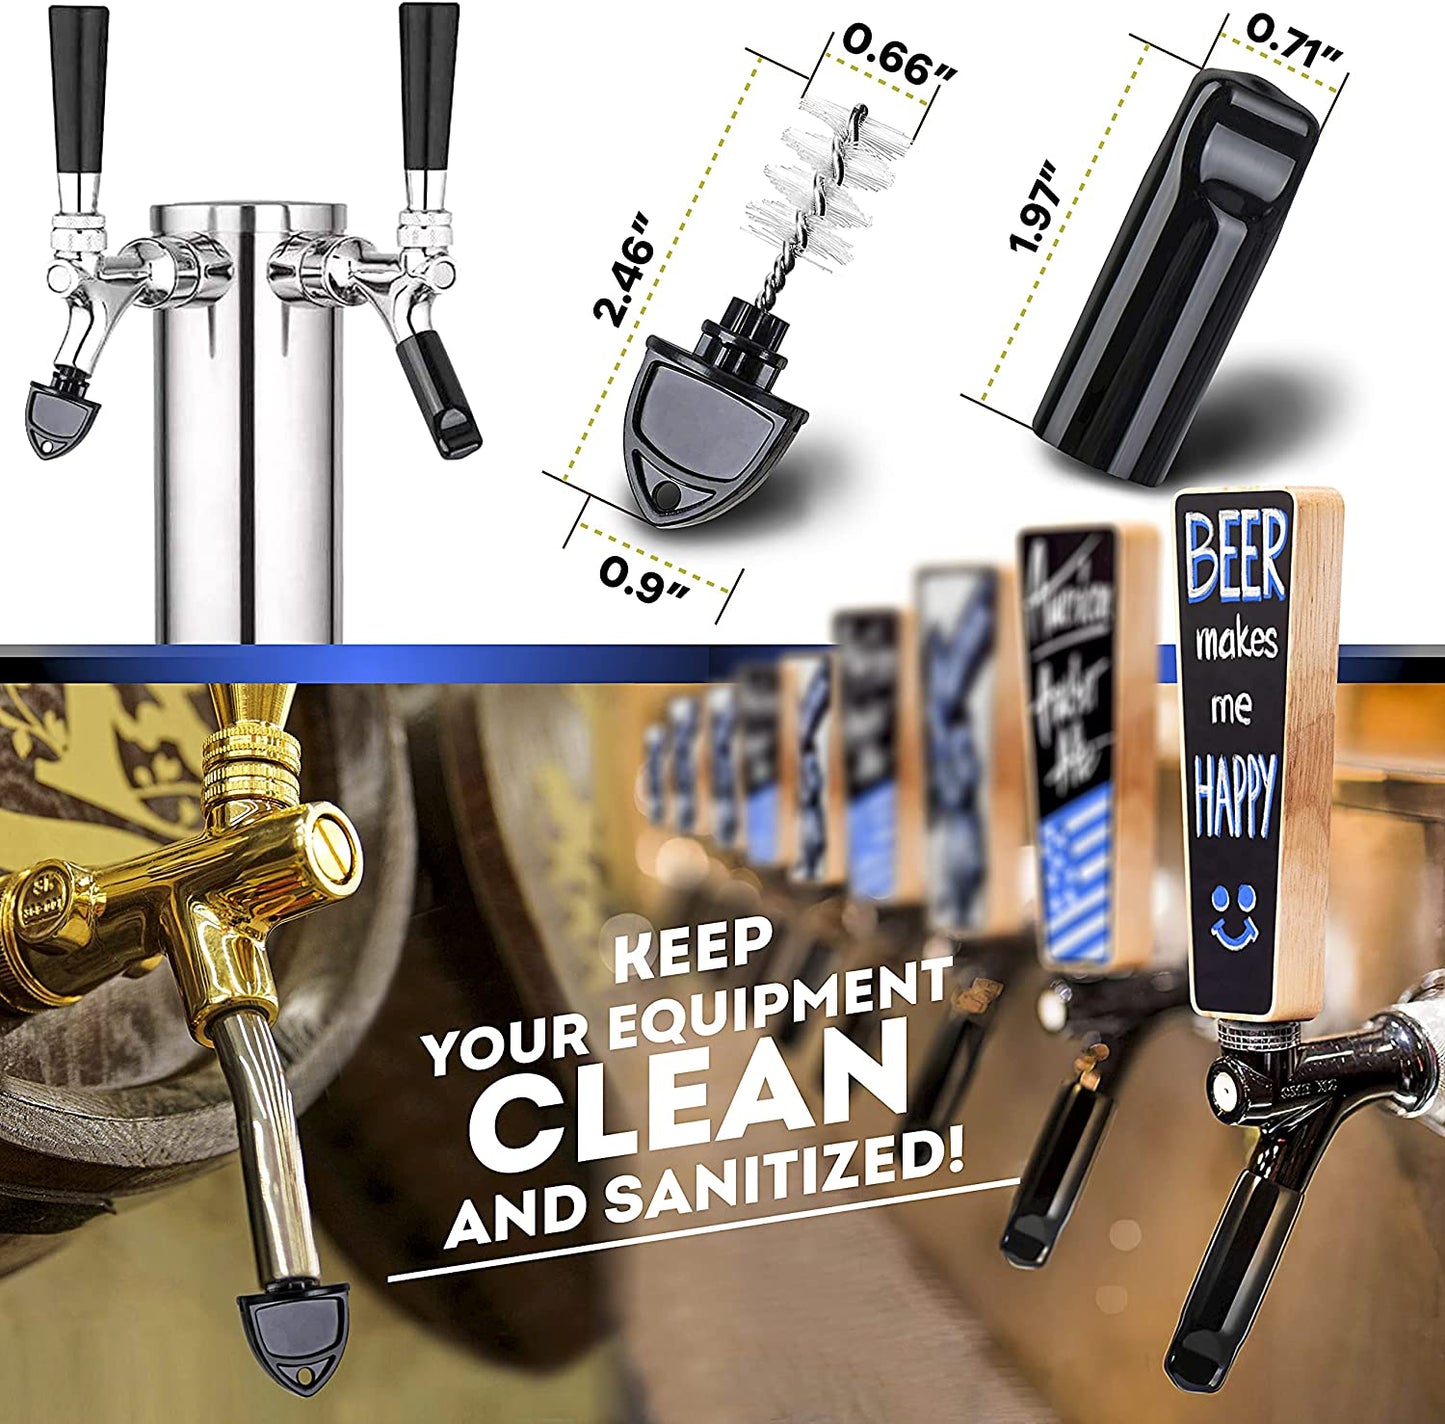 Beer Tap Handle and Two Liquid Chalk Markers Set - Wooden Keg Taps Handles for Standard Faucets and Kegerators with Reusable Chalkboard - Suitable for Home Brew, Bars, Kegs and Draft Beer